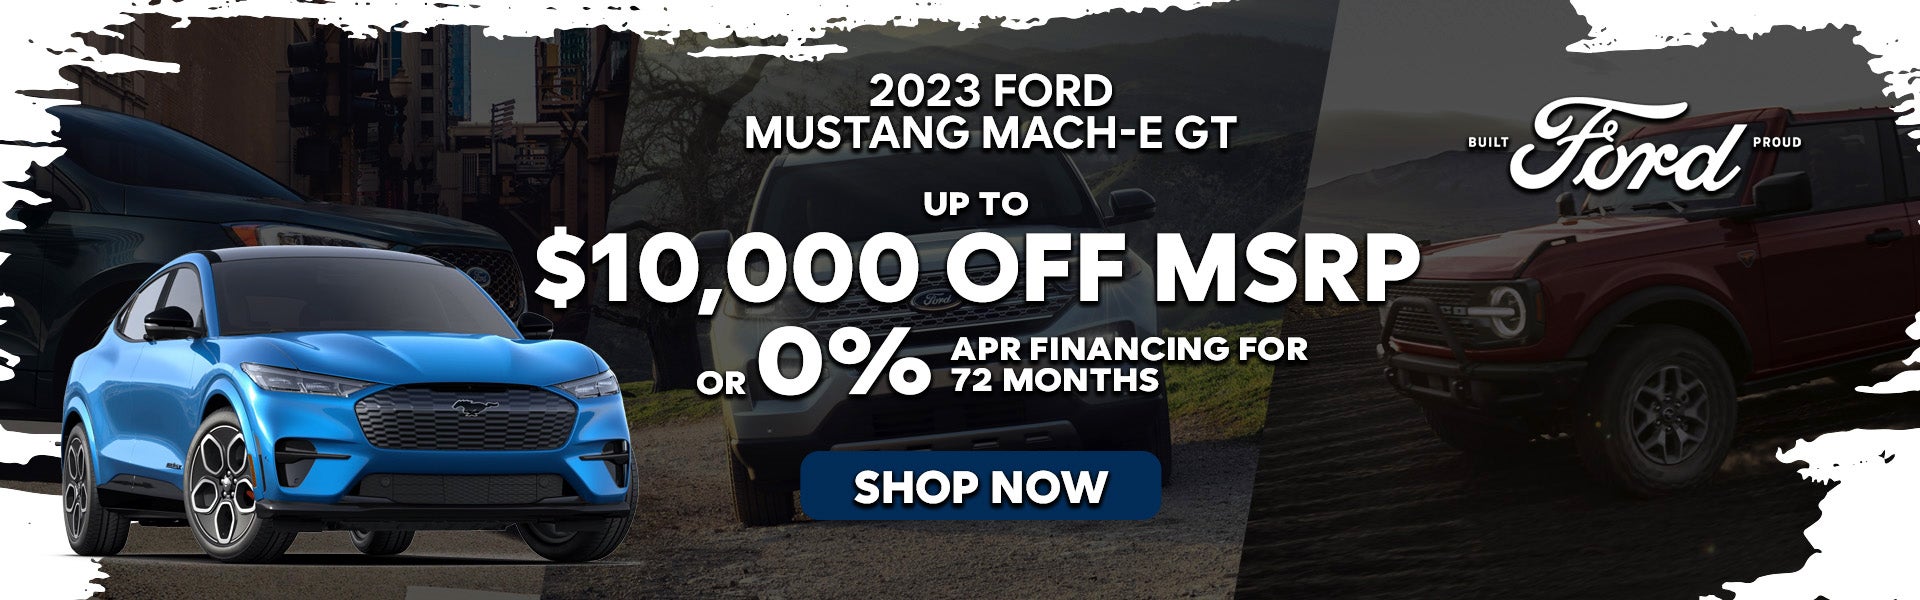 2023 Ford Mustang Mach-E GT Special Offer